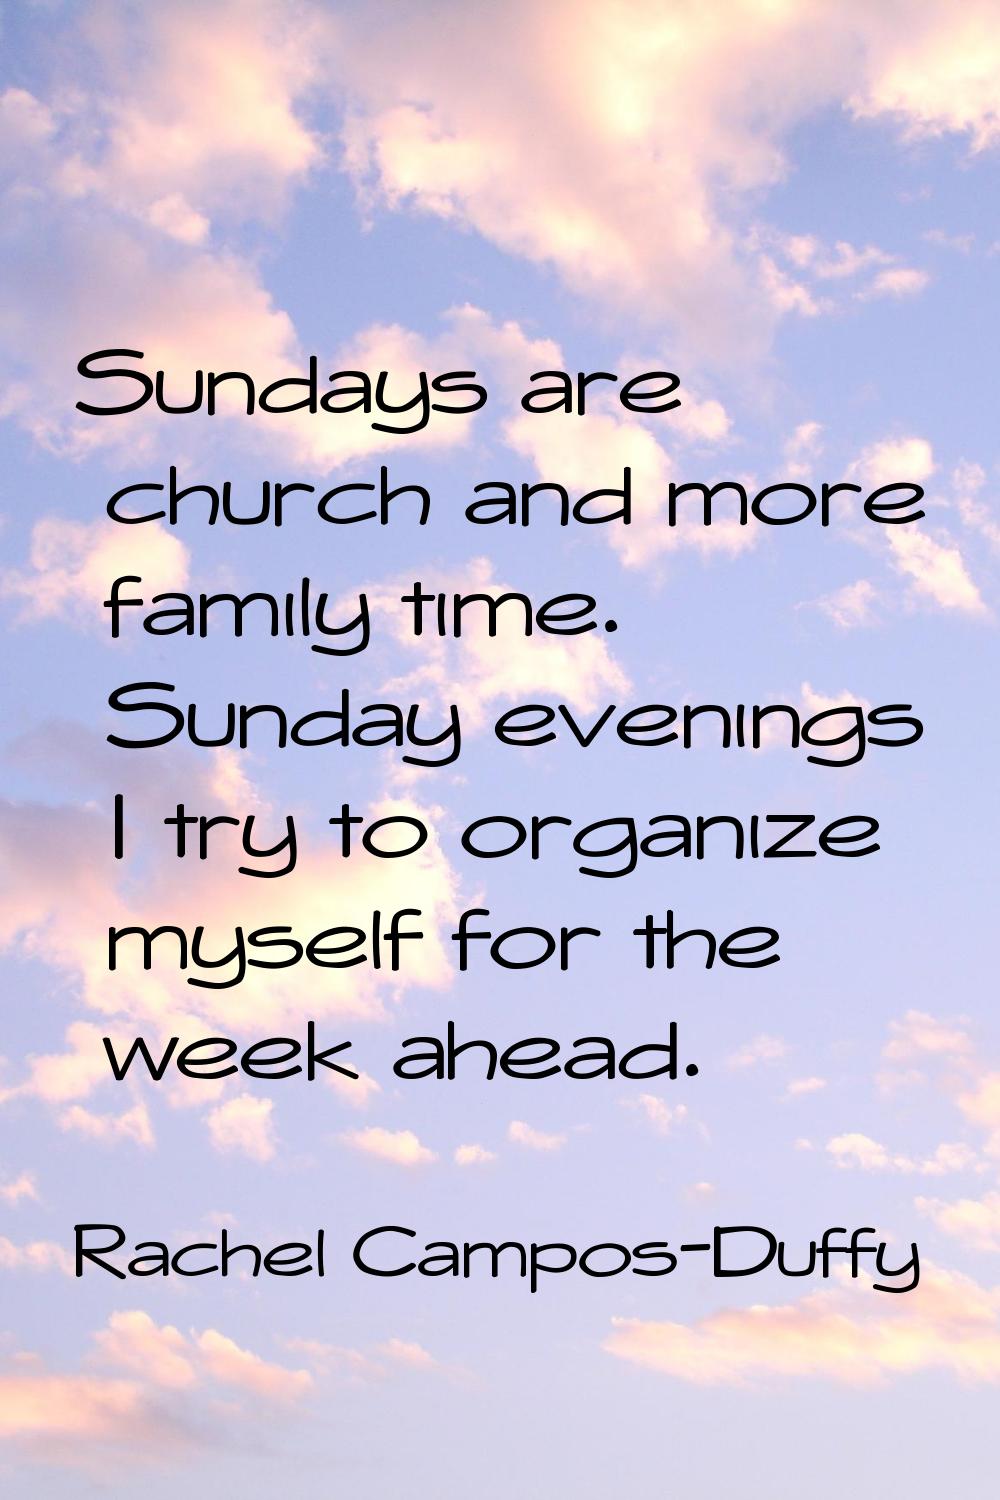 Sundays are church and more family time. Sunday evenings I try to organize myself for the week ahea